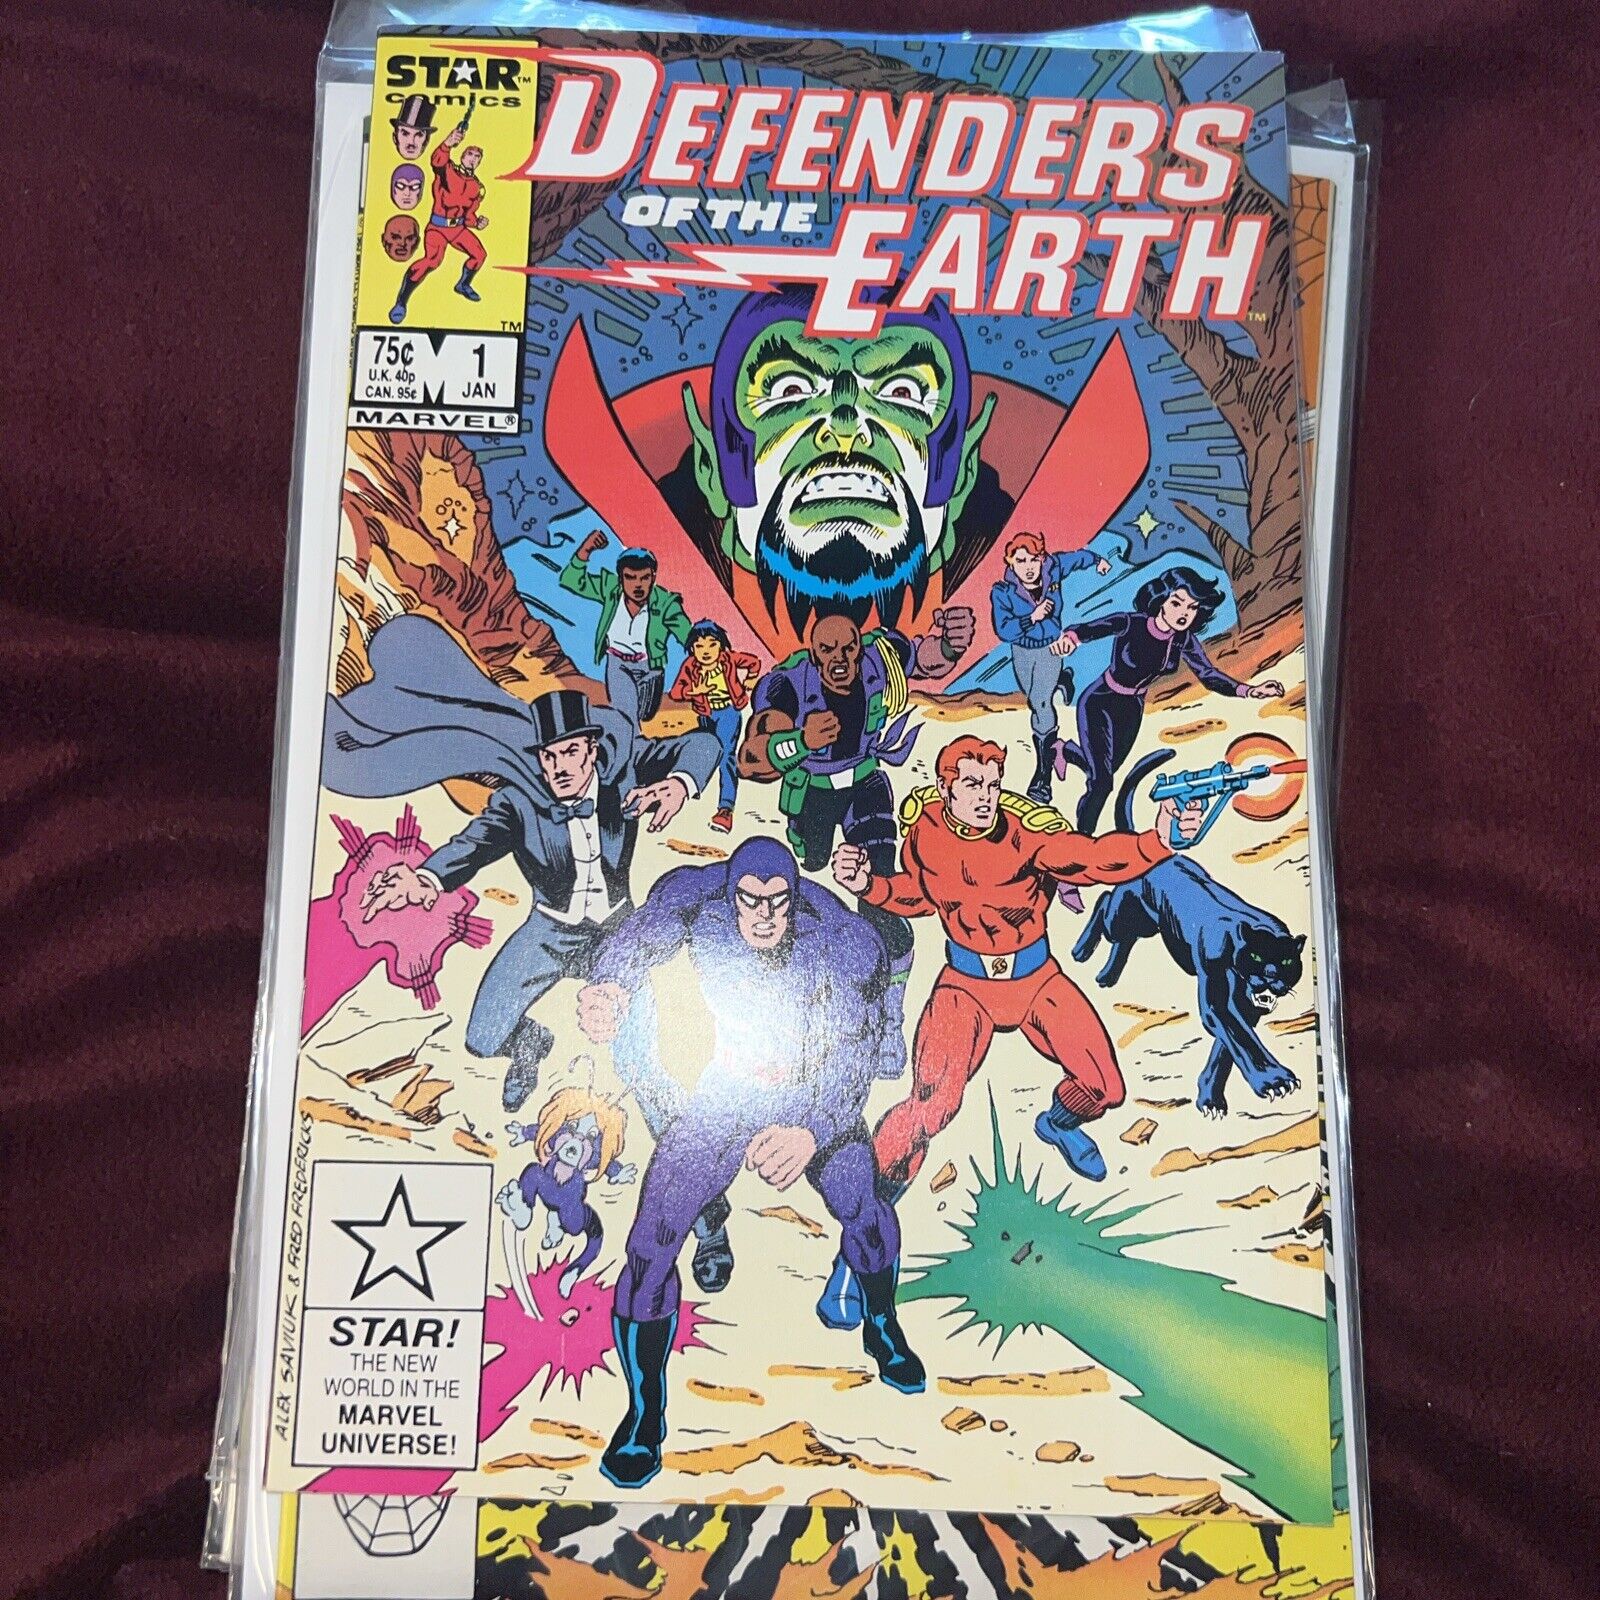 Defenders of the Earth #1 NM 9.4+